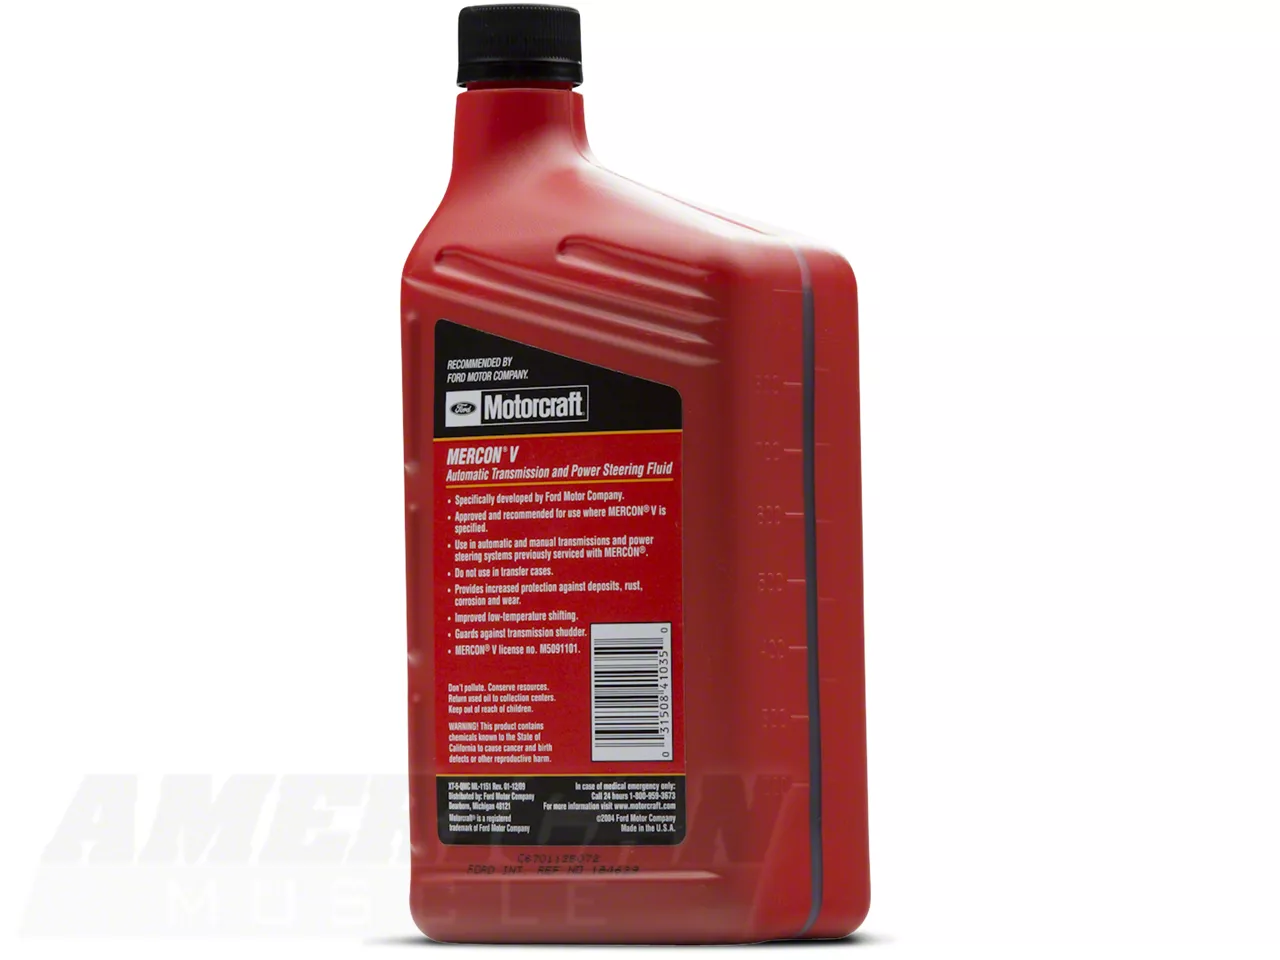 GENUINE FORD MERCON SP AUTOMATIC TRANSMISSION FLUID (NOW REPLACED BY MERCON  LV)